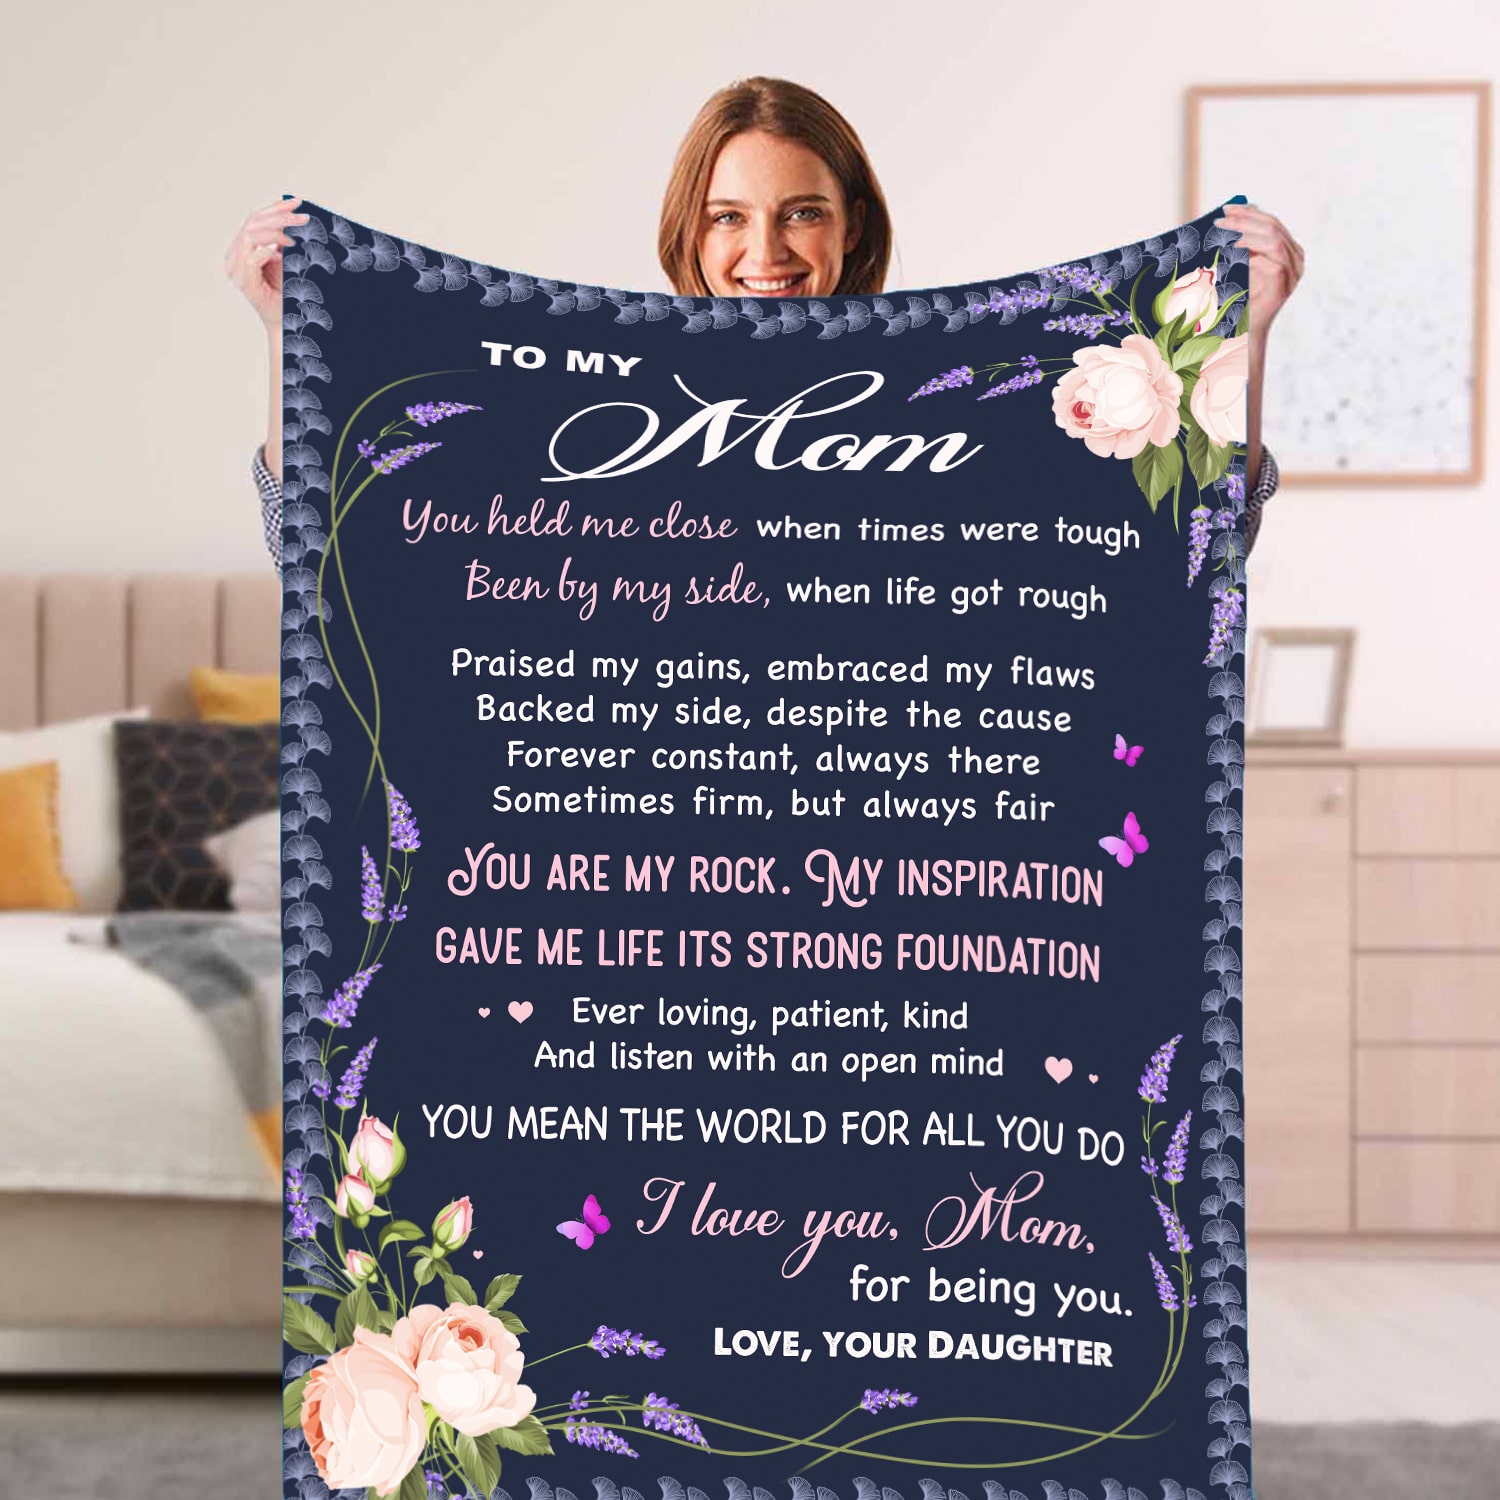 Mom Gift From Son Mother's Day Gift Personalized Fleece Blanket - Oh Canvas